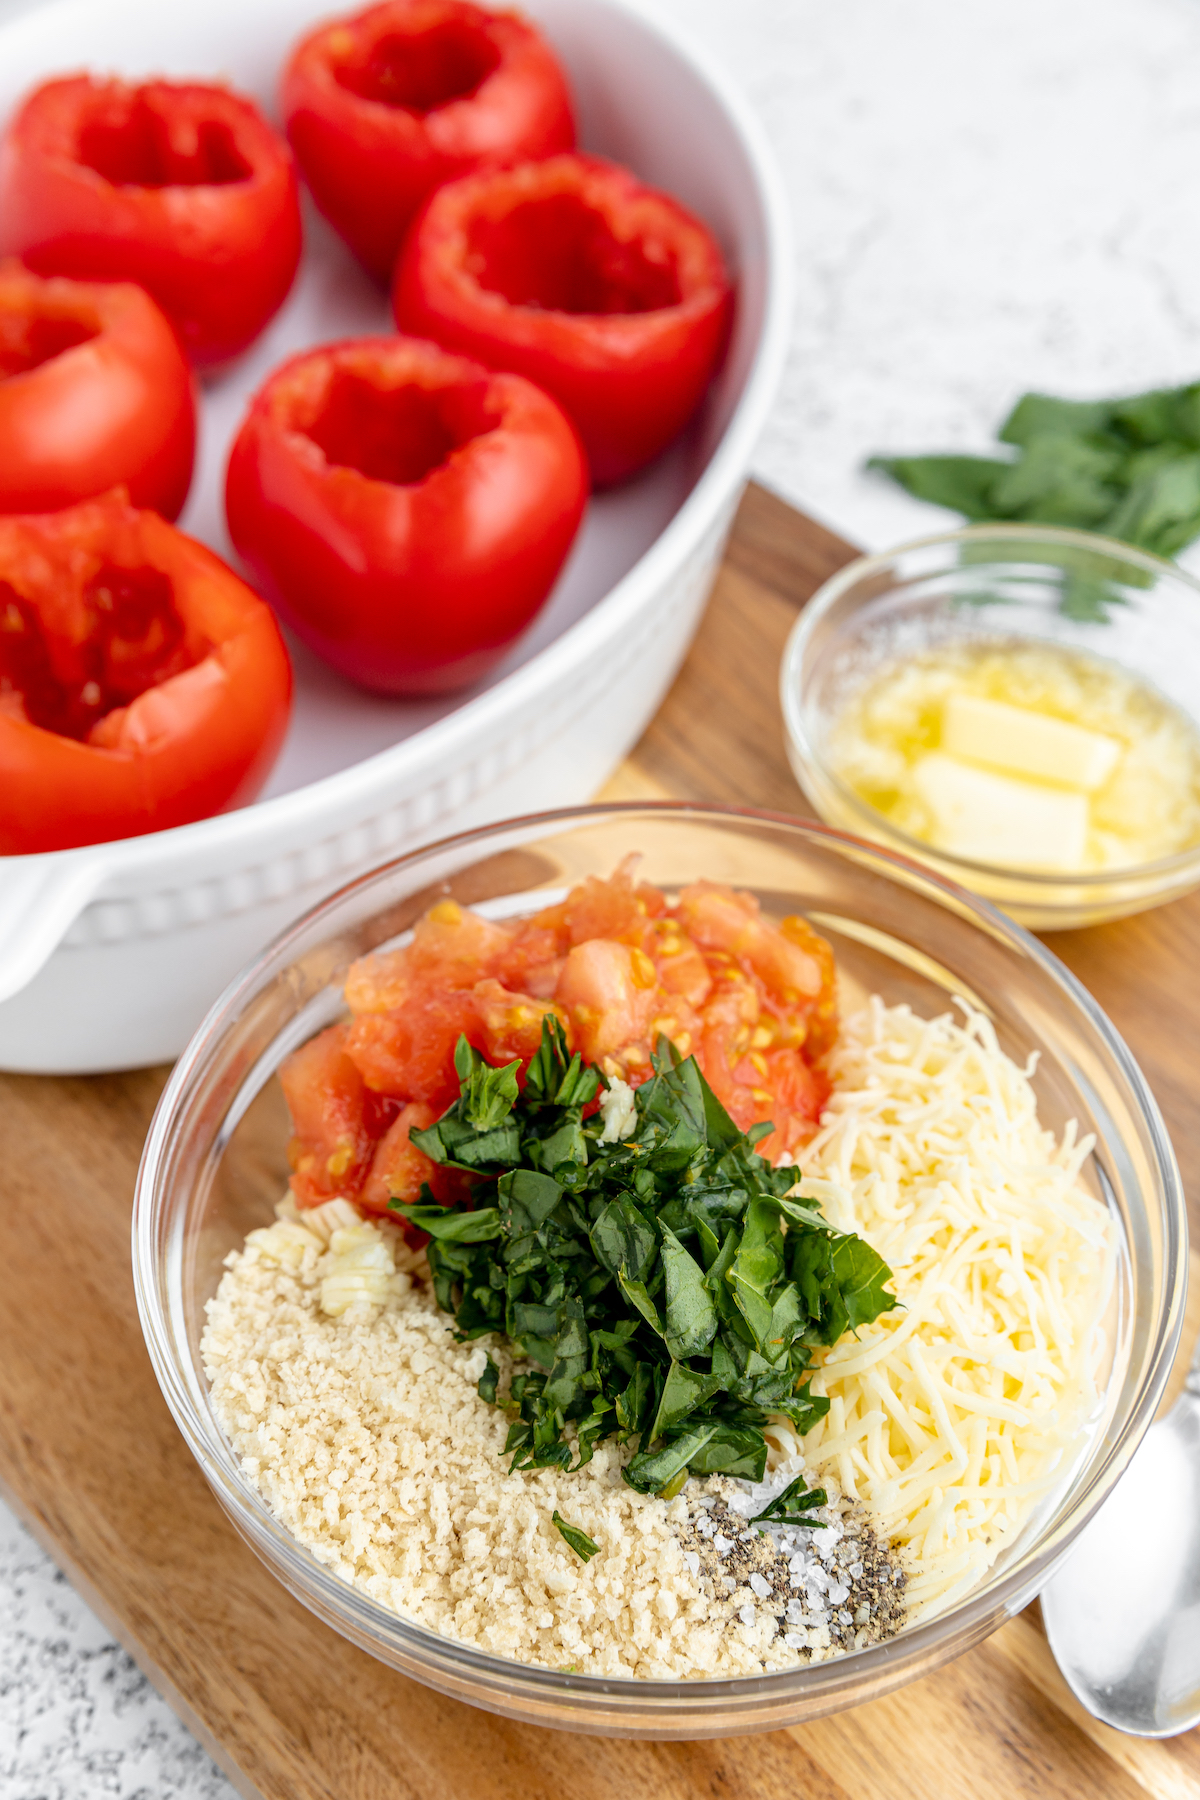 A white oval baking dish with cored tomatoes inside. A small glass bowl filling ingredients is nearby on the table.